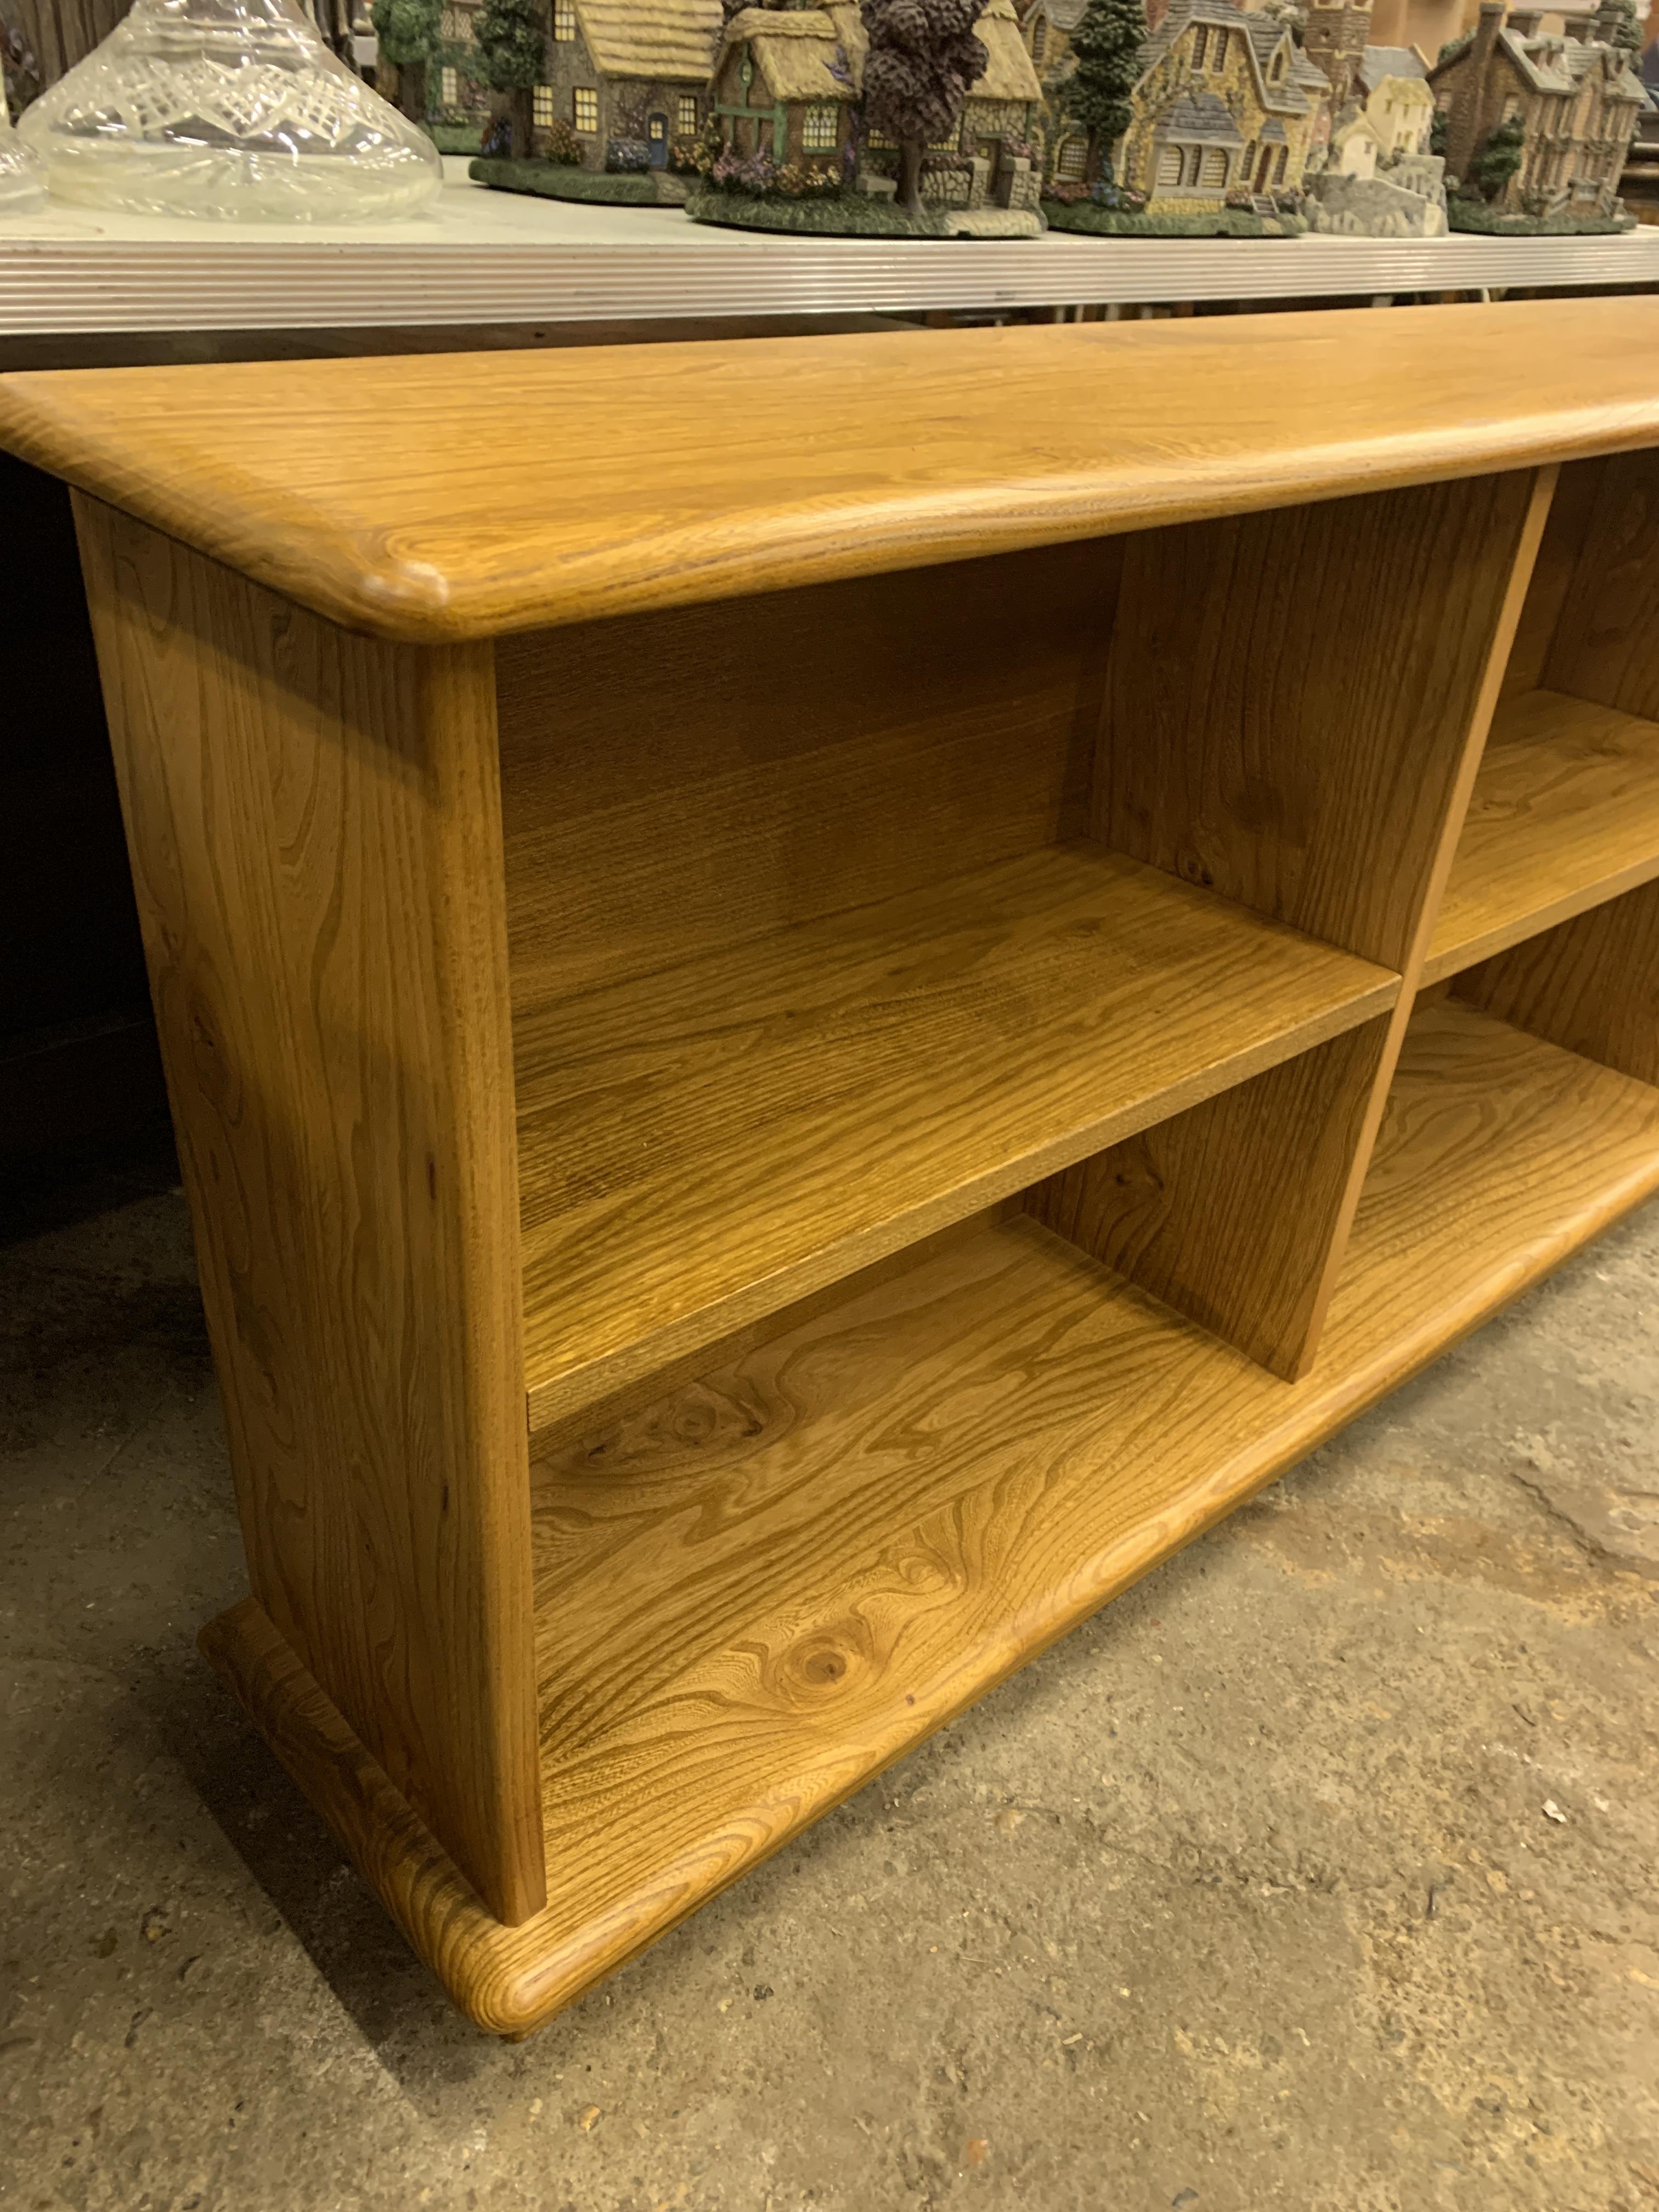 Ercol style open display shelves, - Image 4 of 4